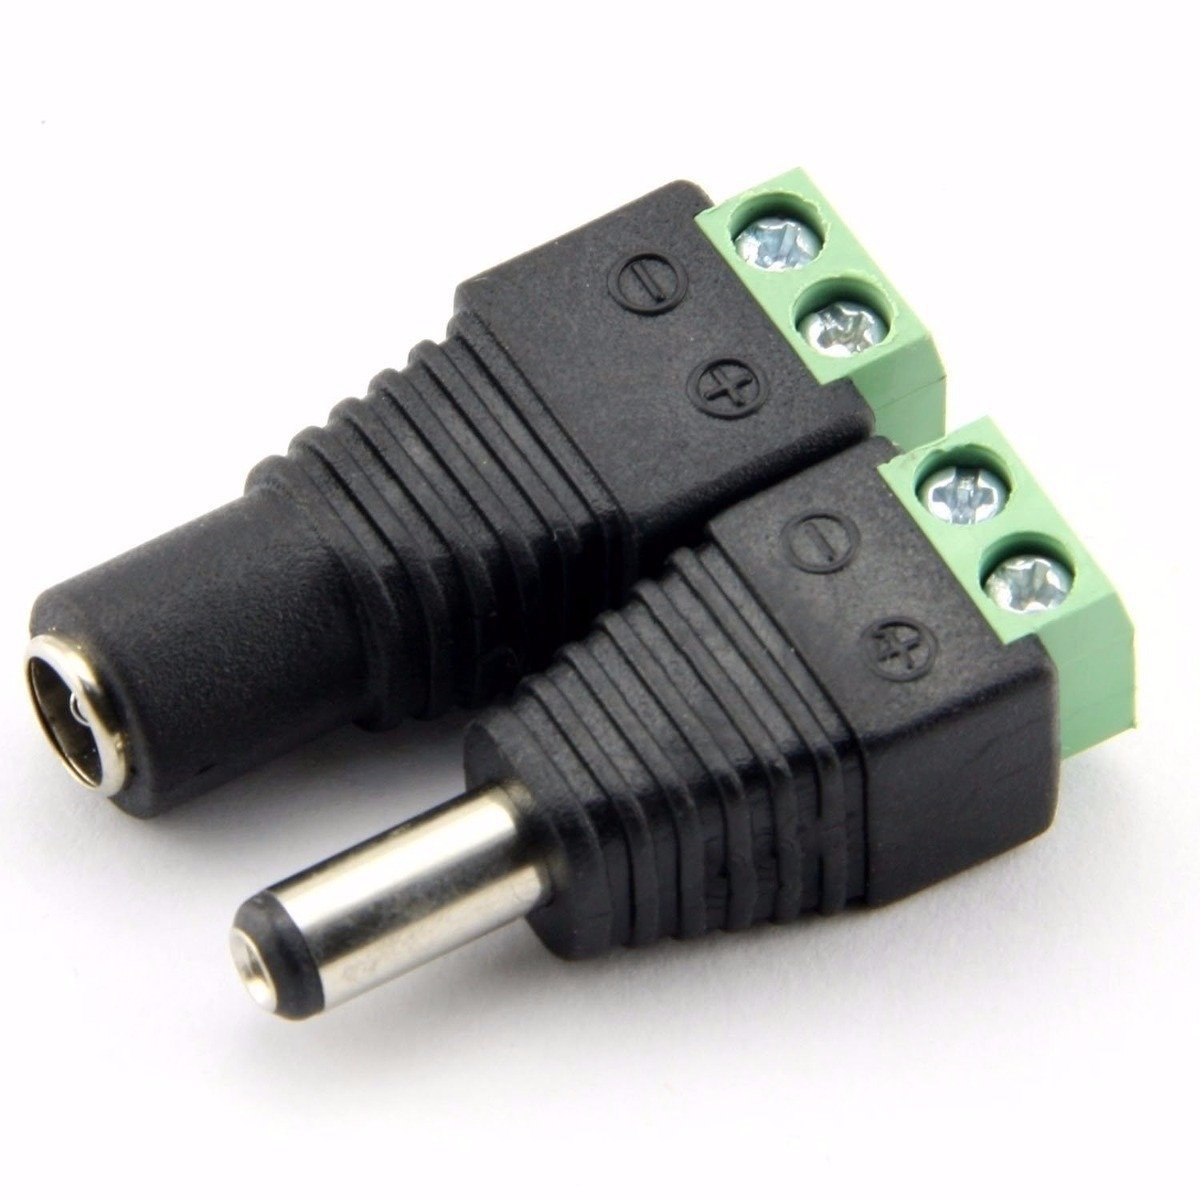 Cable Length: LED Connector Occus DC12V Plug Adapter Connector Male for 5050 3528 LED Strip Light Power Supply Wholesale 